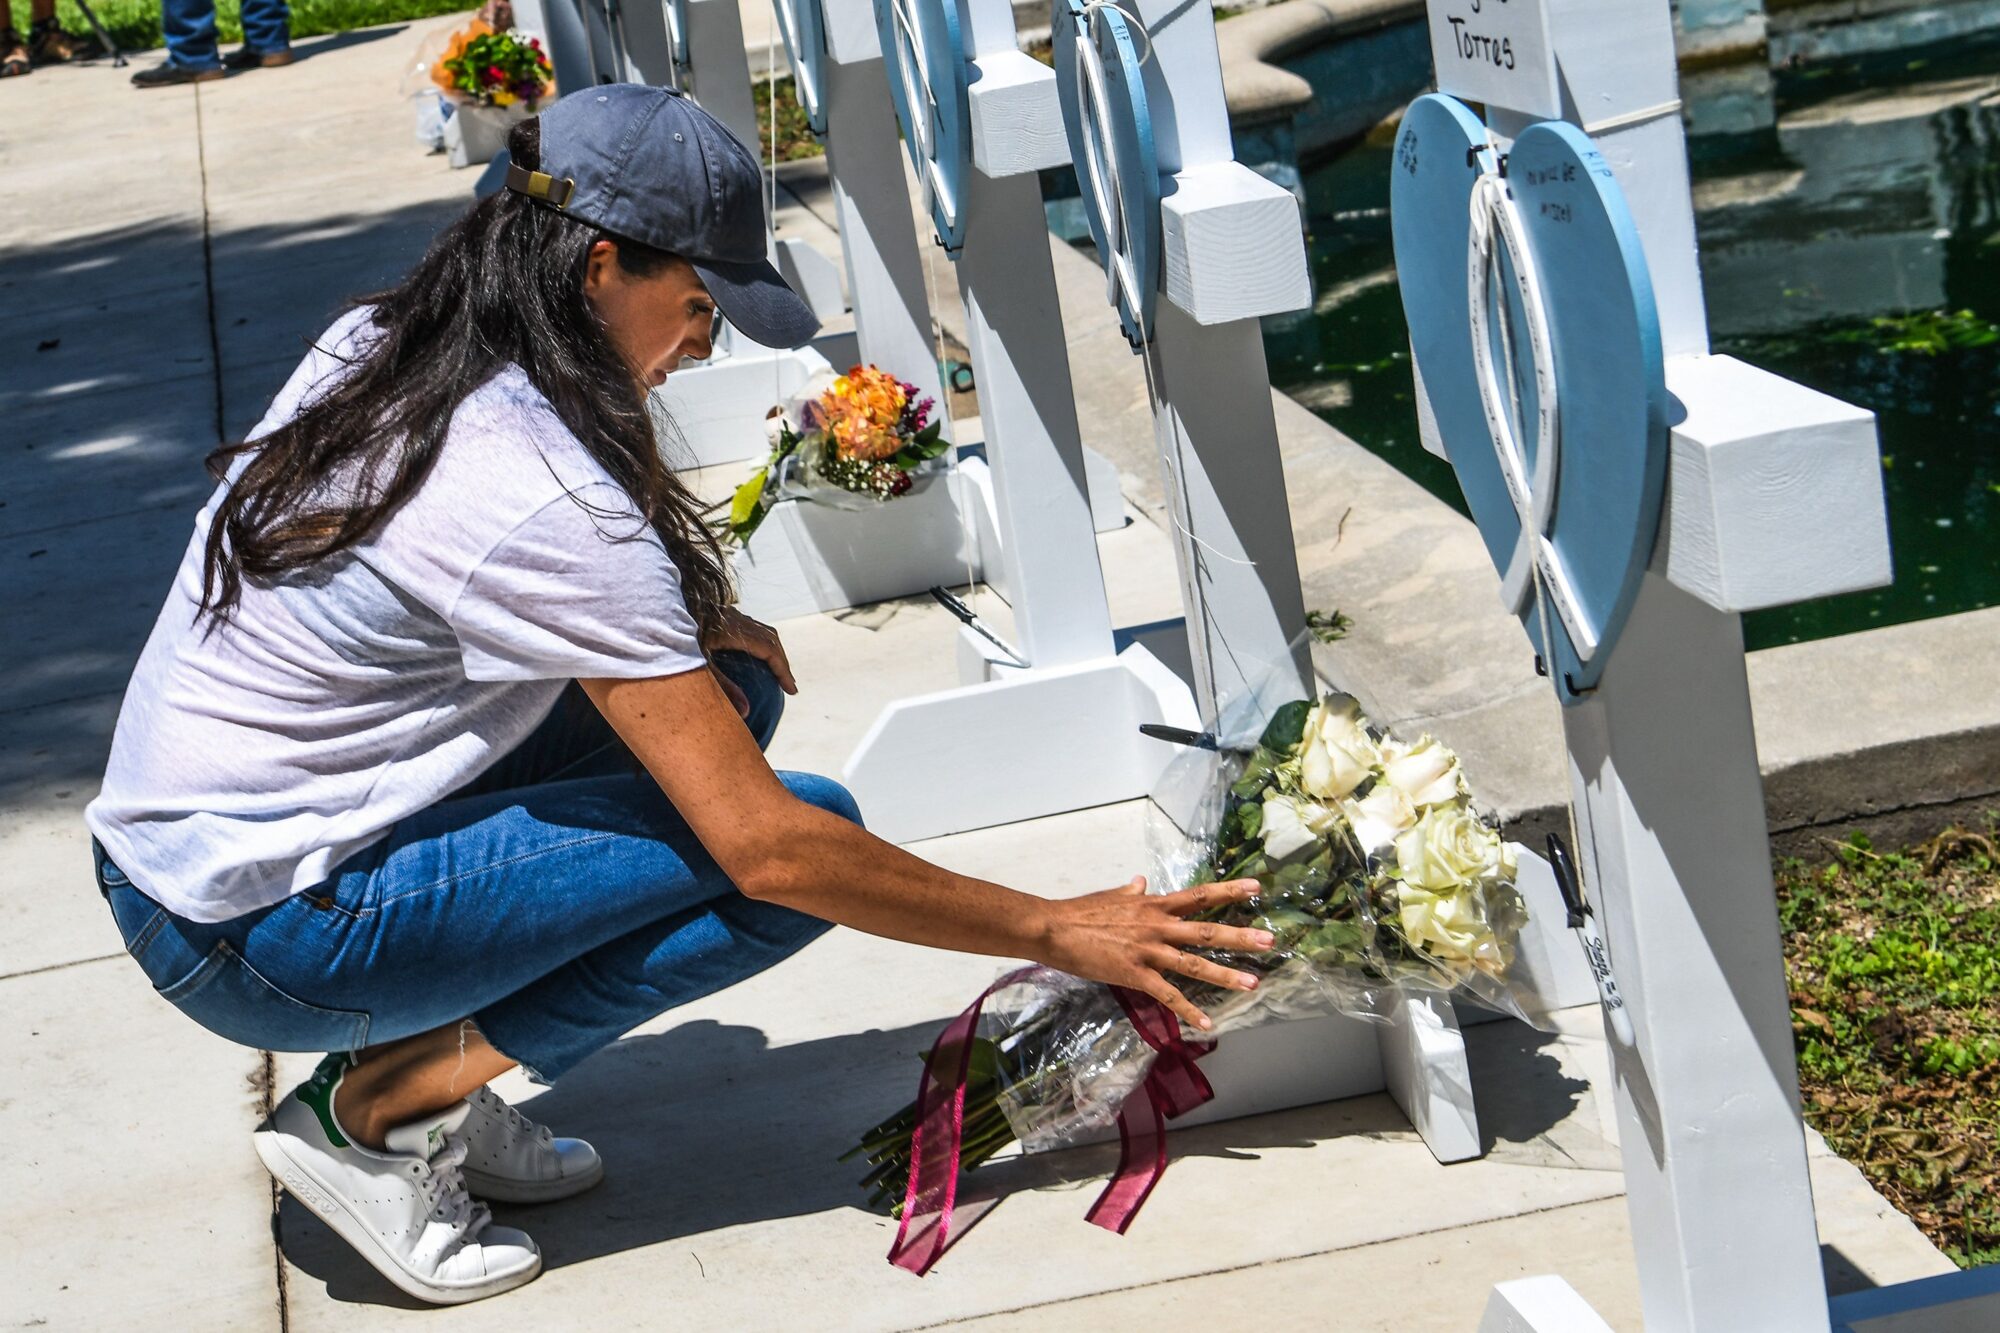 Meghan Markle places flowers as she mourns at a makeshift memorial outside Uvalde County Courthouse in Uvalde, Texas, on May 26, 2022. (AFP via Getty Images)